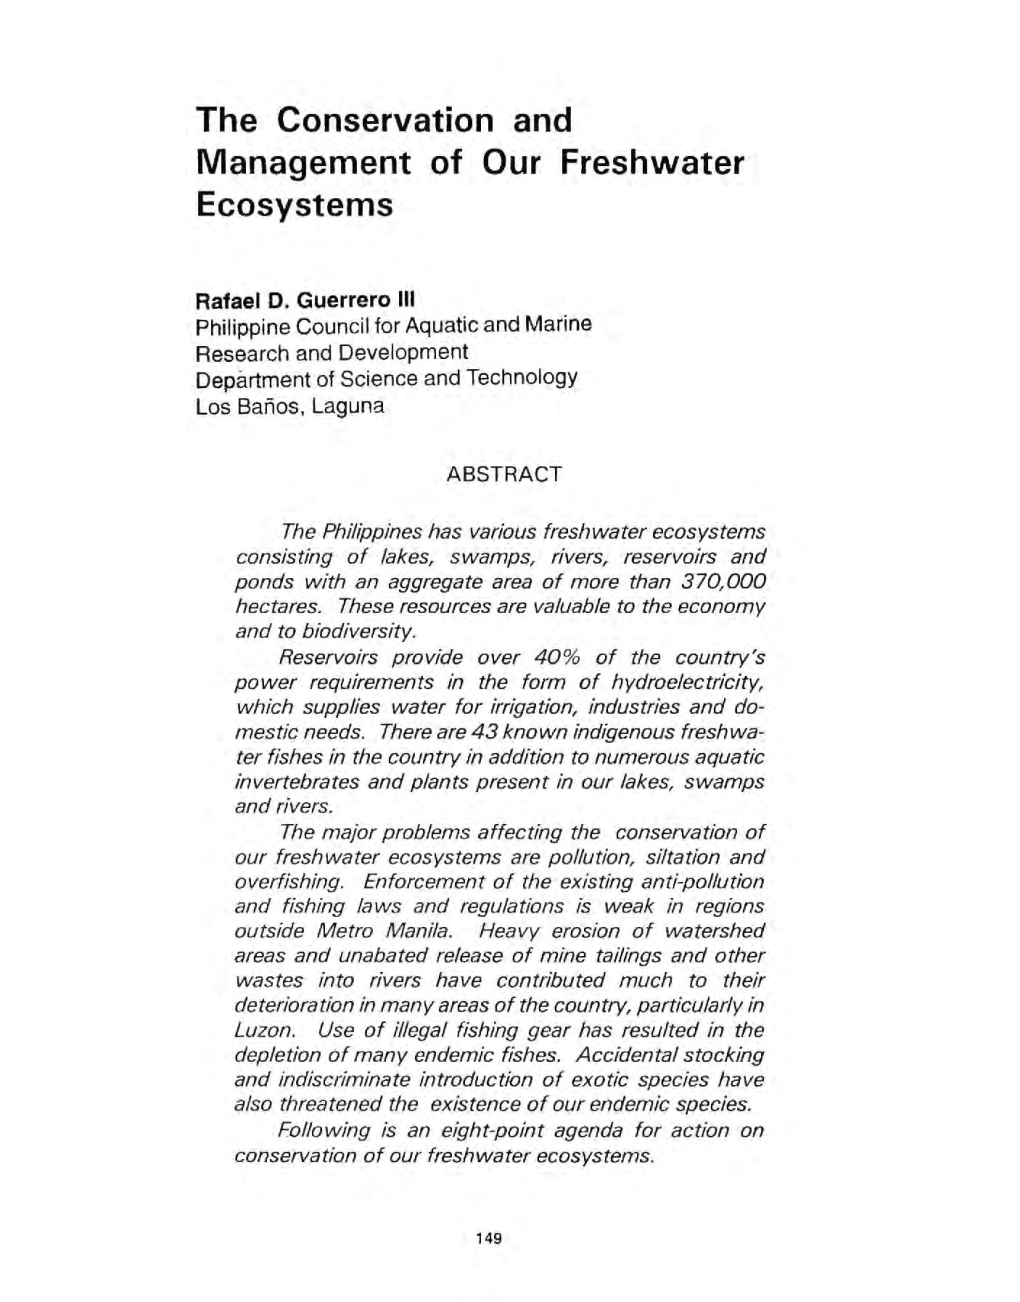 The Conservation and Management of Our Freshwater Ecosystems